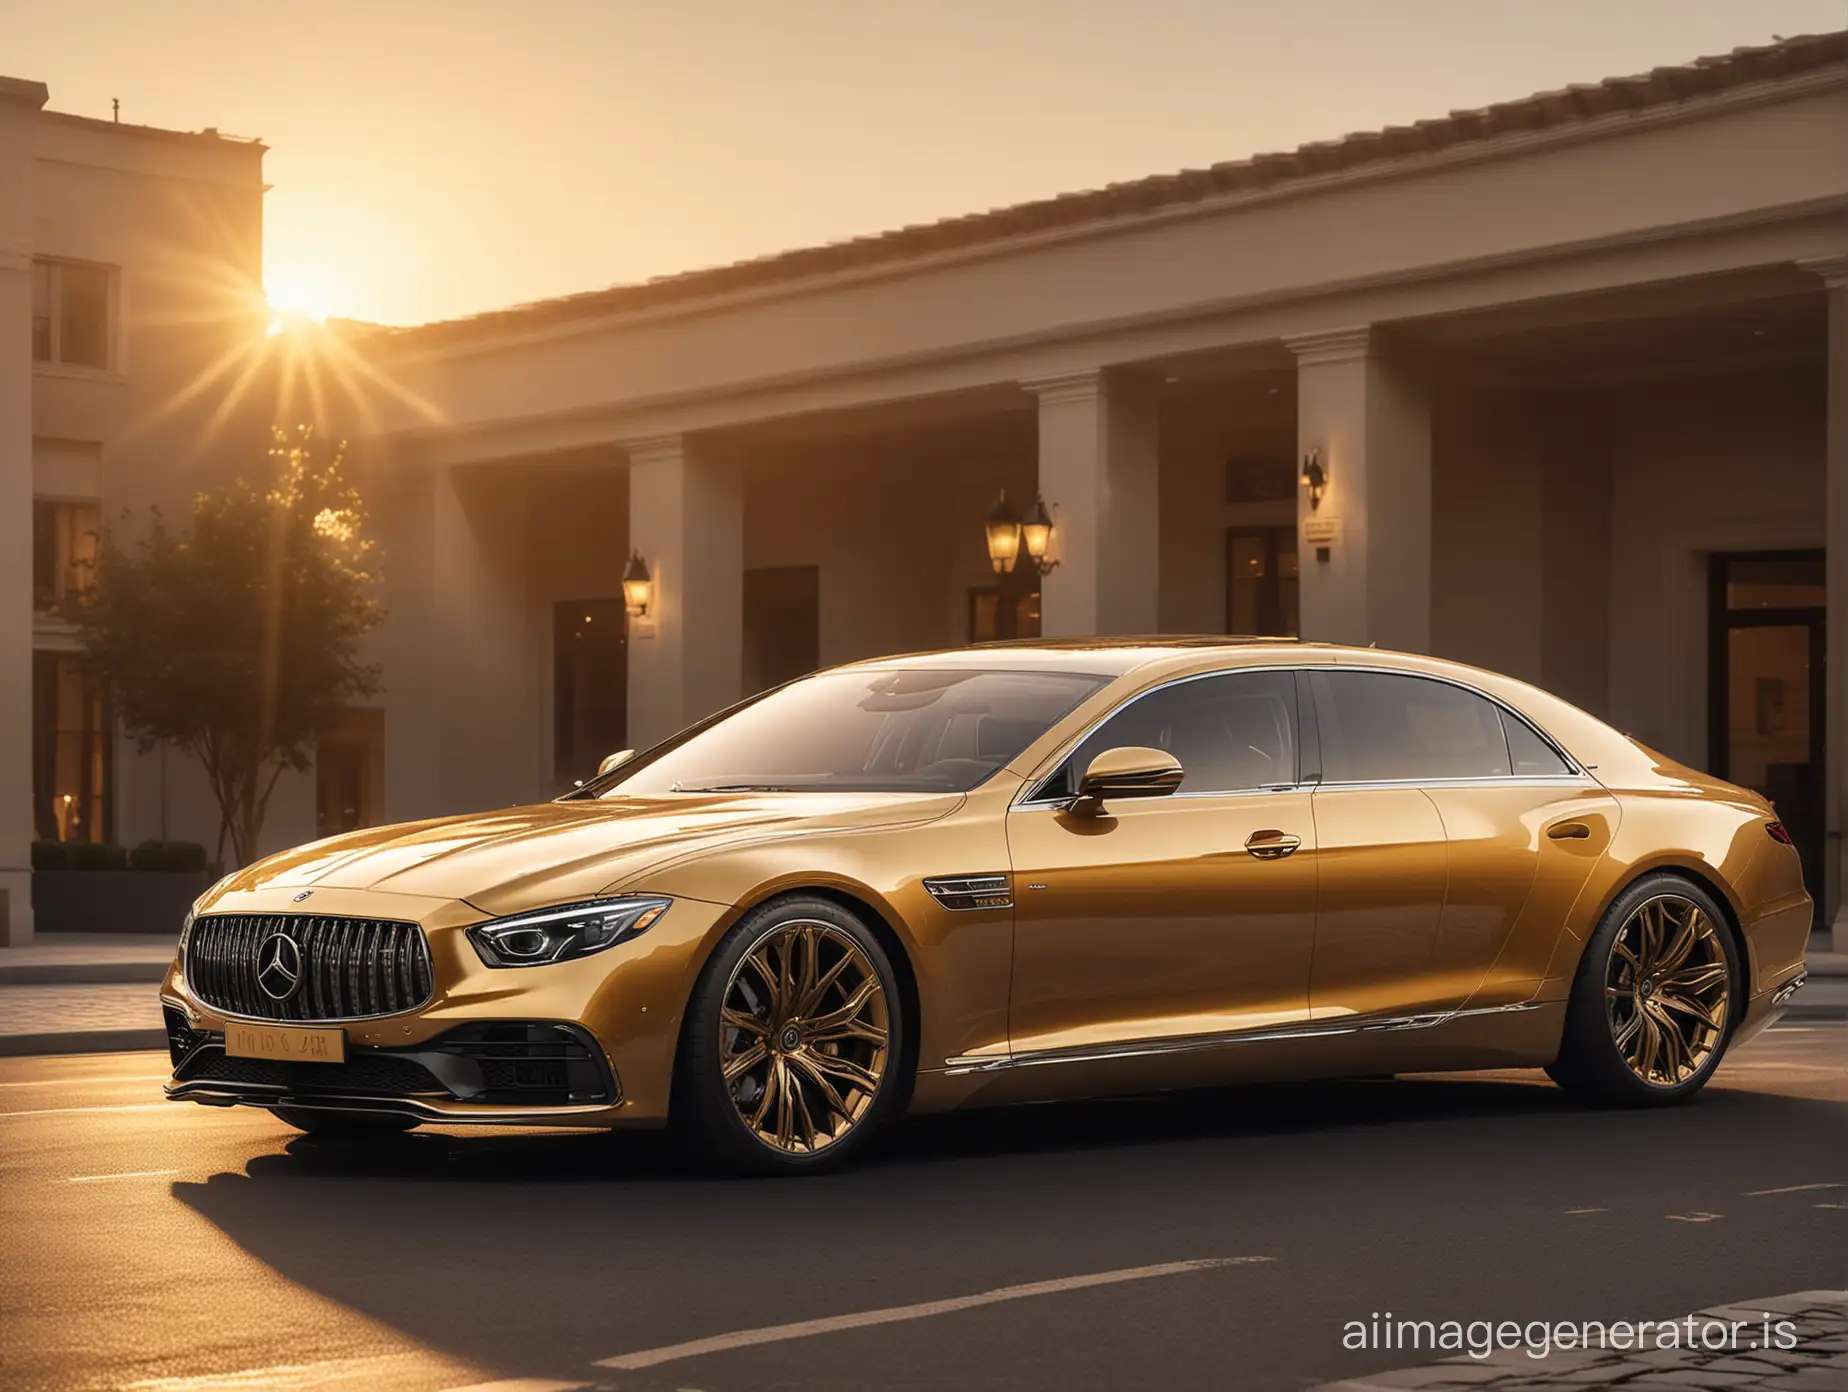 Create the ultimate executive luxury car, taking design elements from all known abrands and models throughout history. Realistic photograph. golden hour.